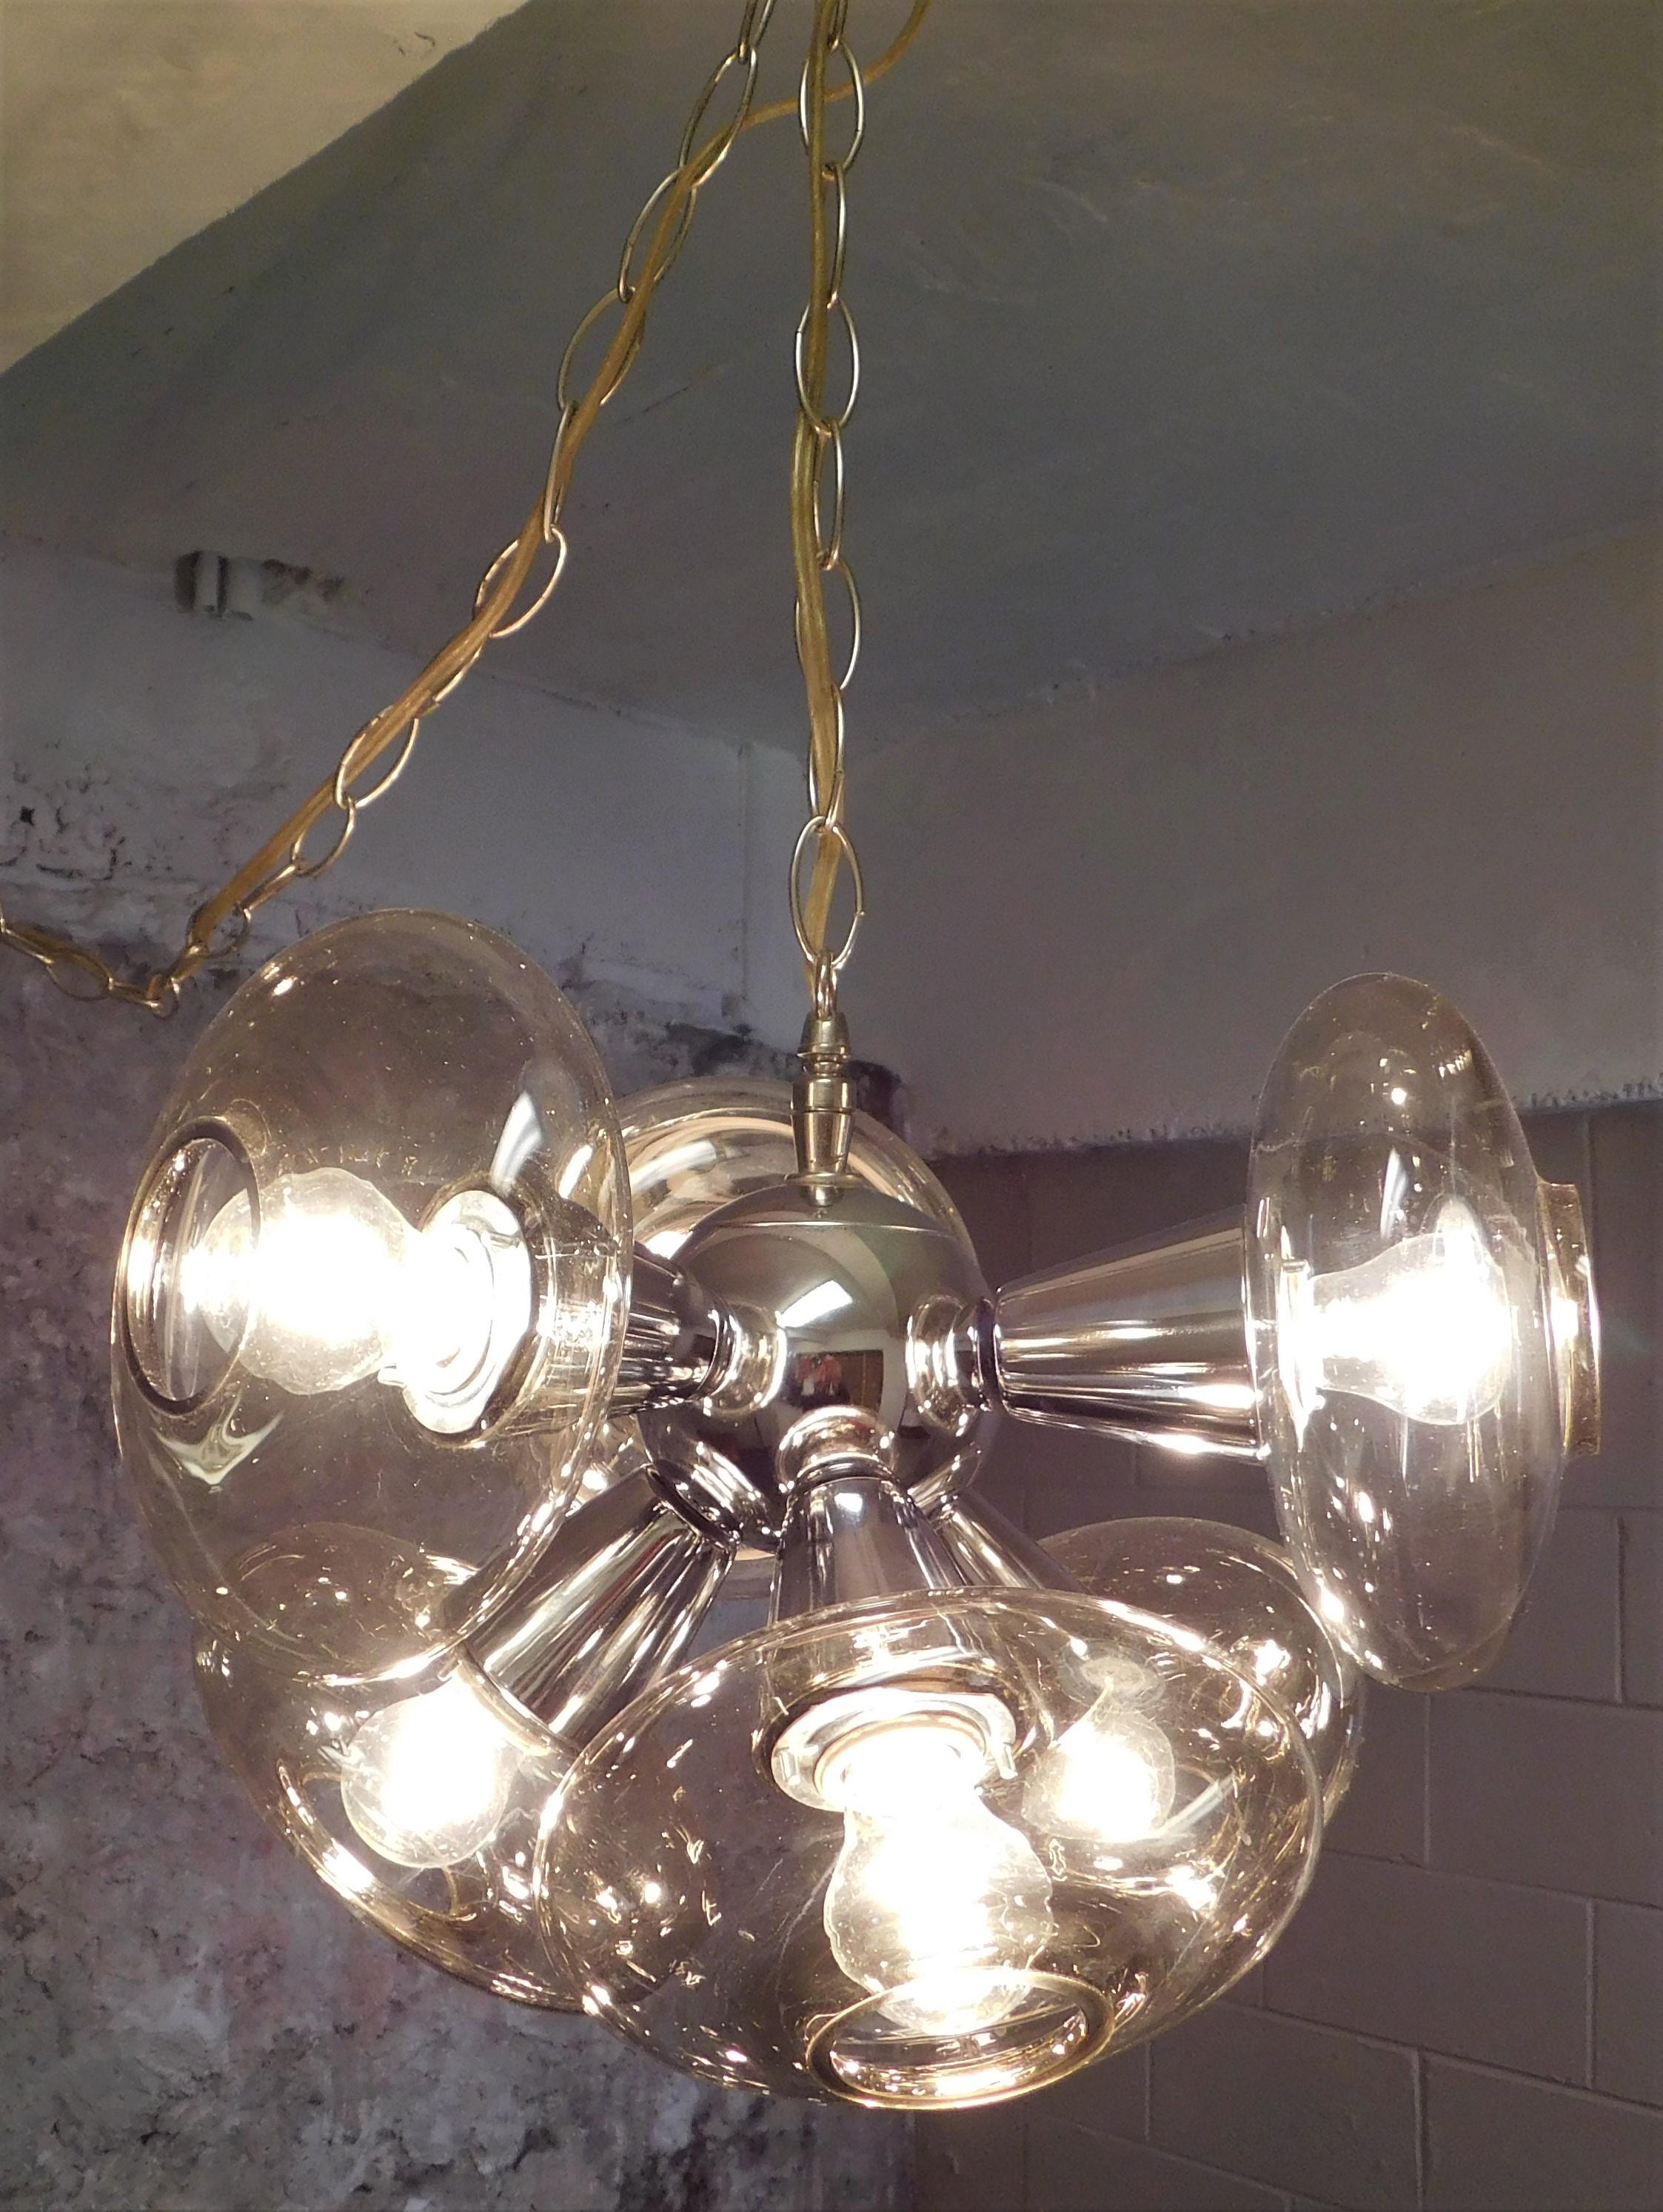 Excellent condition chrome hanging Sputnik light with six lights with tinted glass globes. Over 24 feet of hanging chain and electrical cord with an off on dial switch, actual fixture size is 10.5 inches high by 15 inches round.